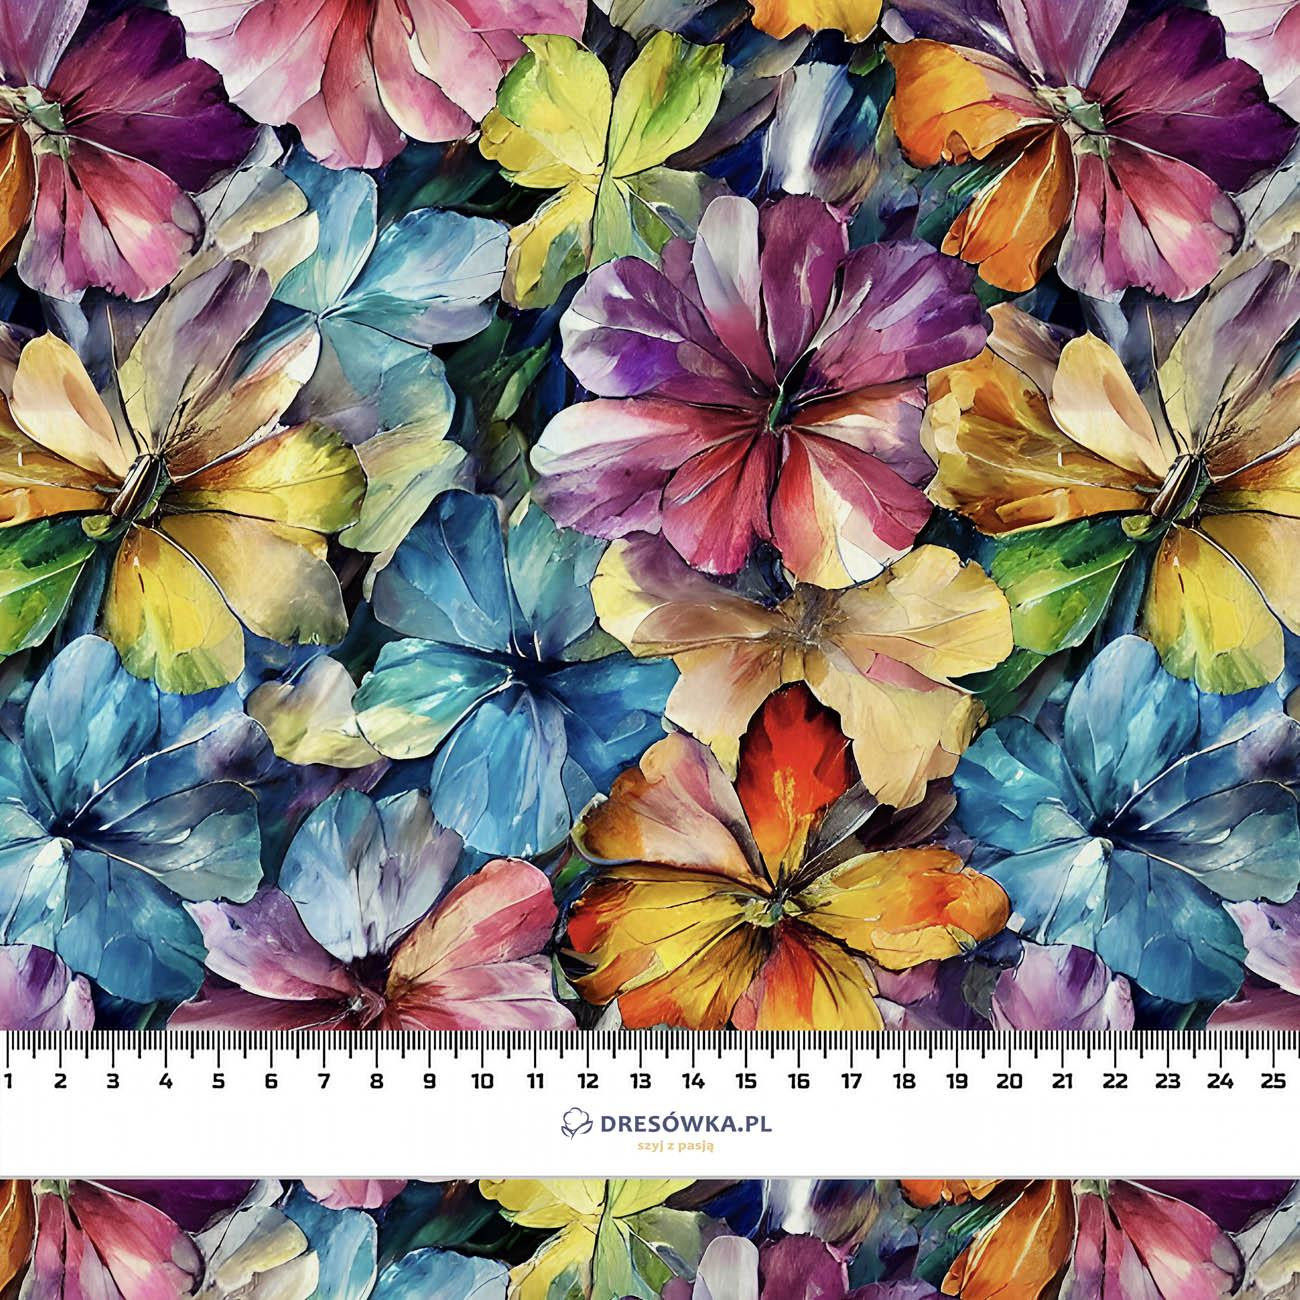 WATER-COLOR FLOWERS pat. 8 - Viscose jersey